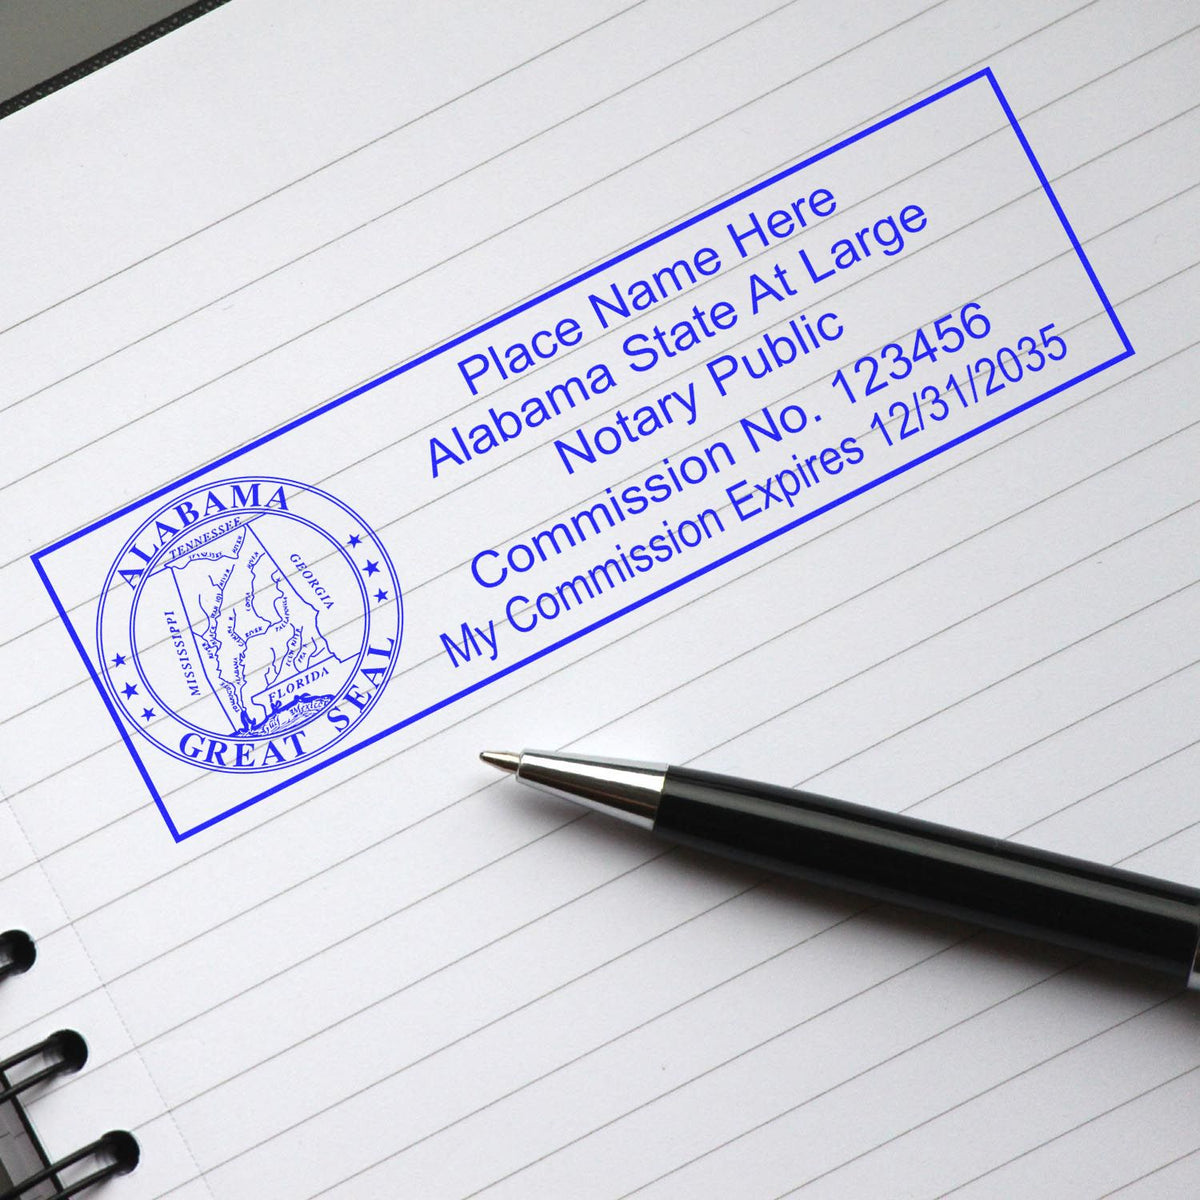 This paper is stamped with a sample imprint of the Wooden Handle Alabama State Seal Notary Public Stamp, signifying its quality and reliability.